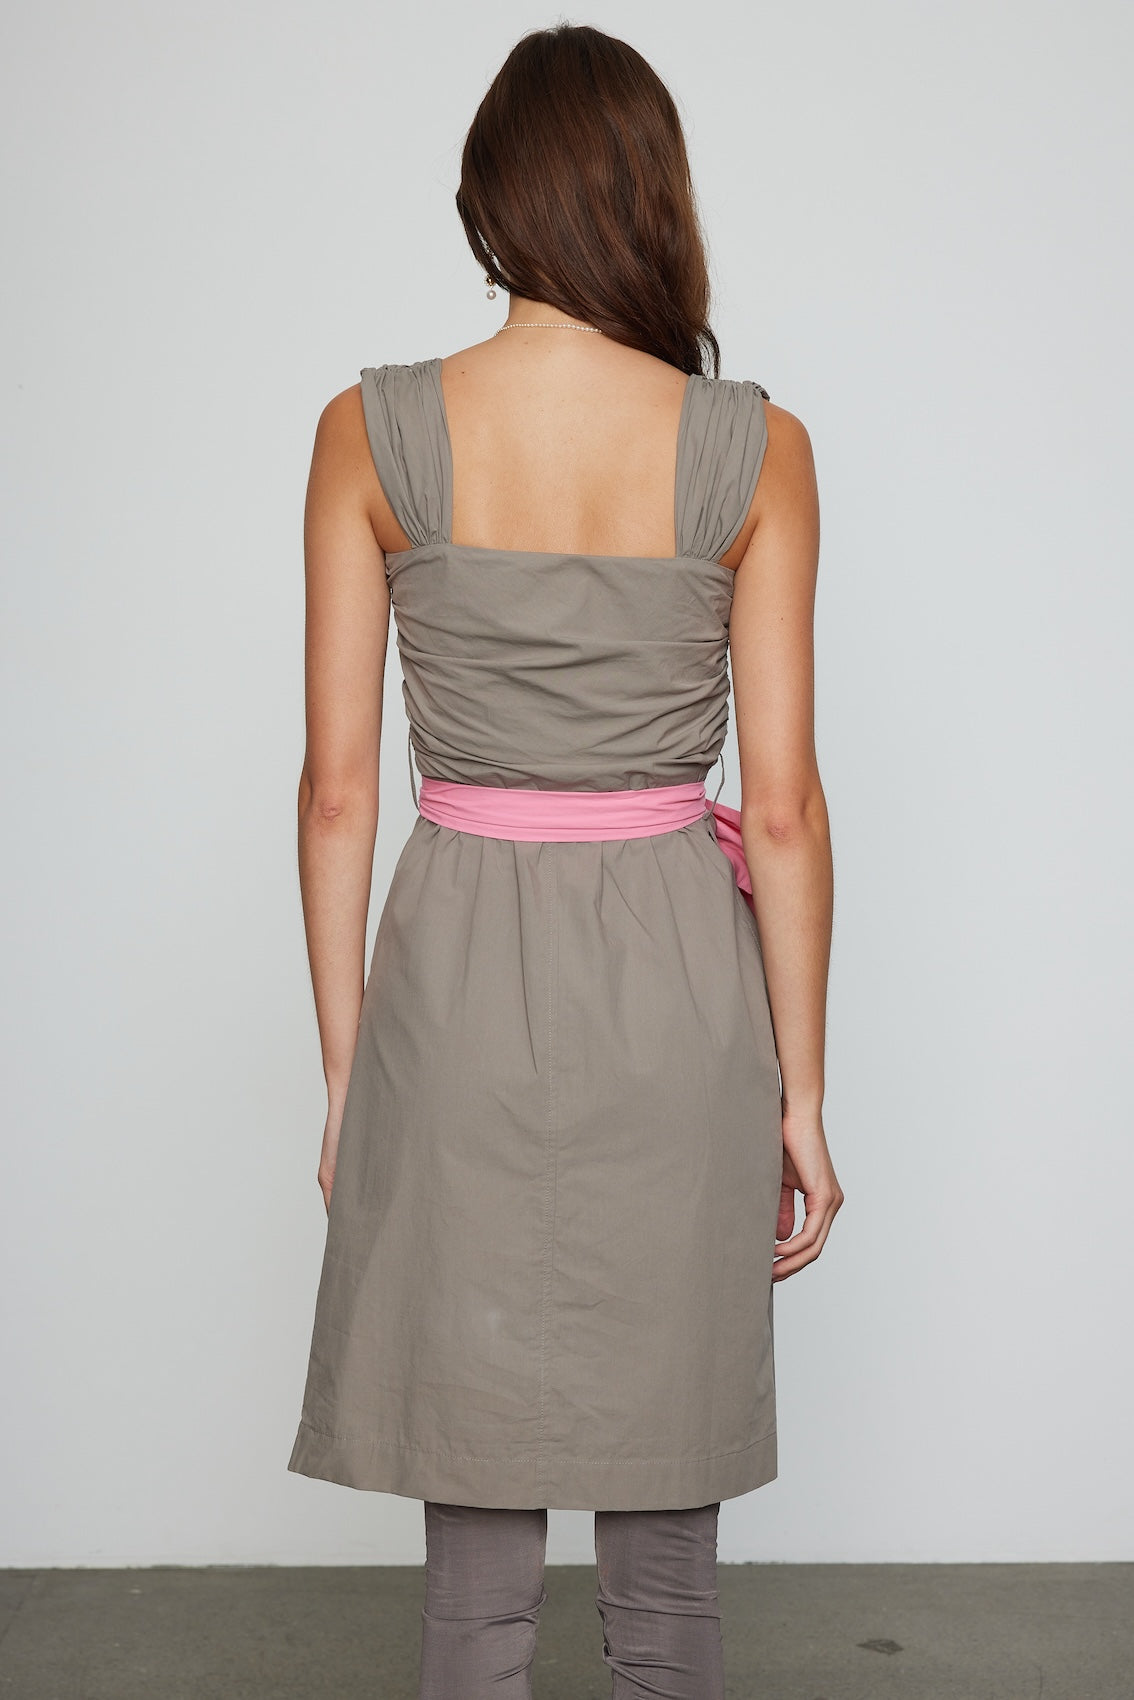 Caro Editions Sophie Dress is a classic dress with a big detachable bow detail on the side. The Dress features wide straps, a slit, and a fitted waist. The dress is made in lightweight cotton poplin. Both the bow and the belt in pink can is detachable.